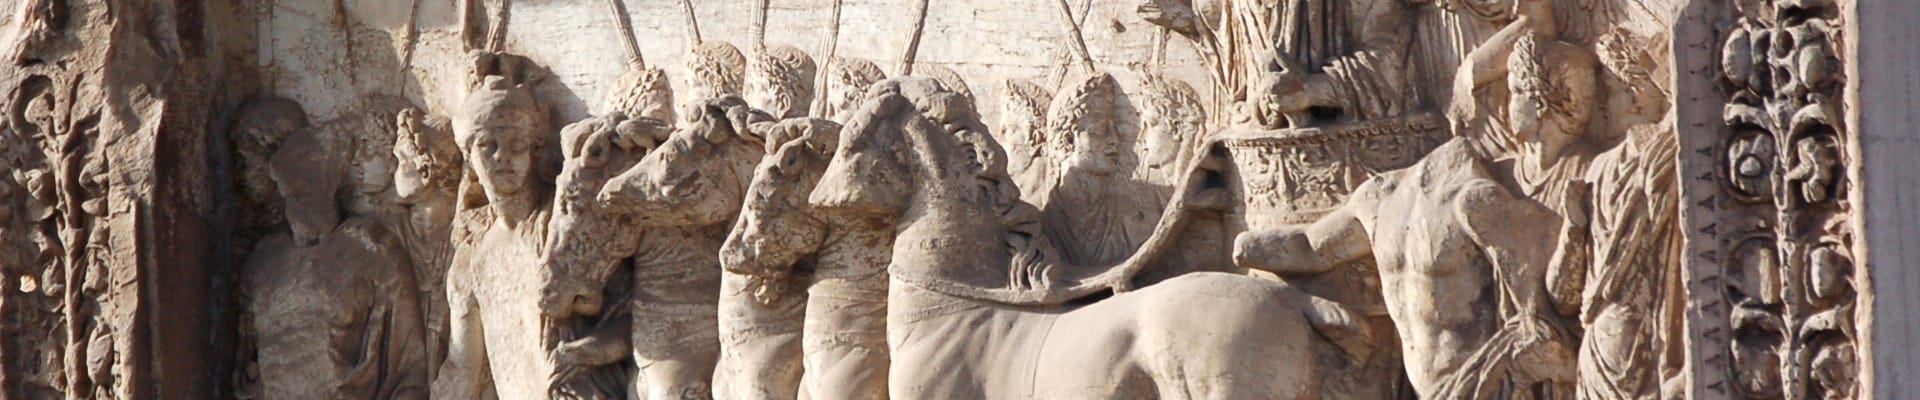 Detail of the Arch of Titus, showing a four-horse chariot in triumphal parade, after 81 CE, Rome, Italy